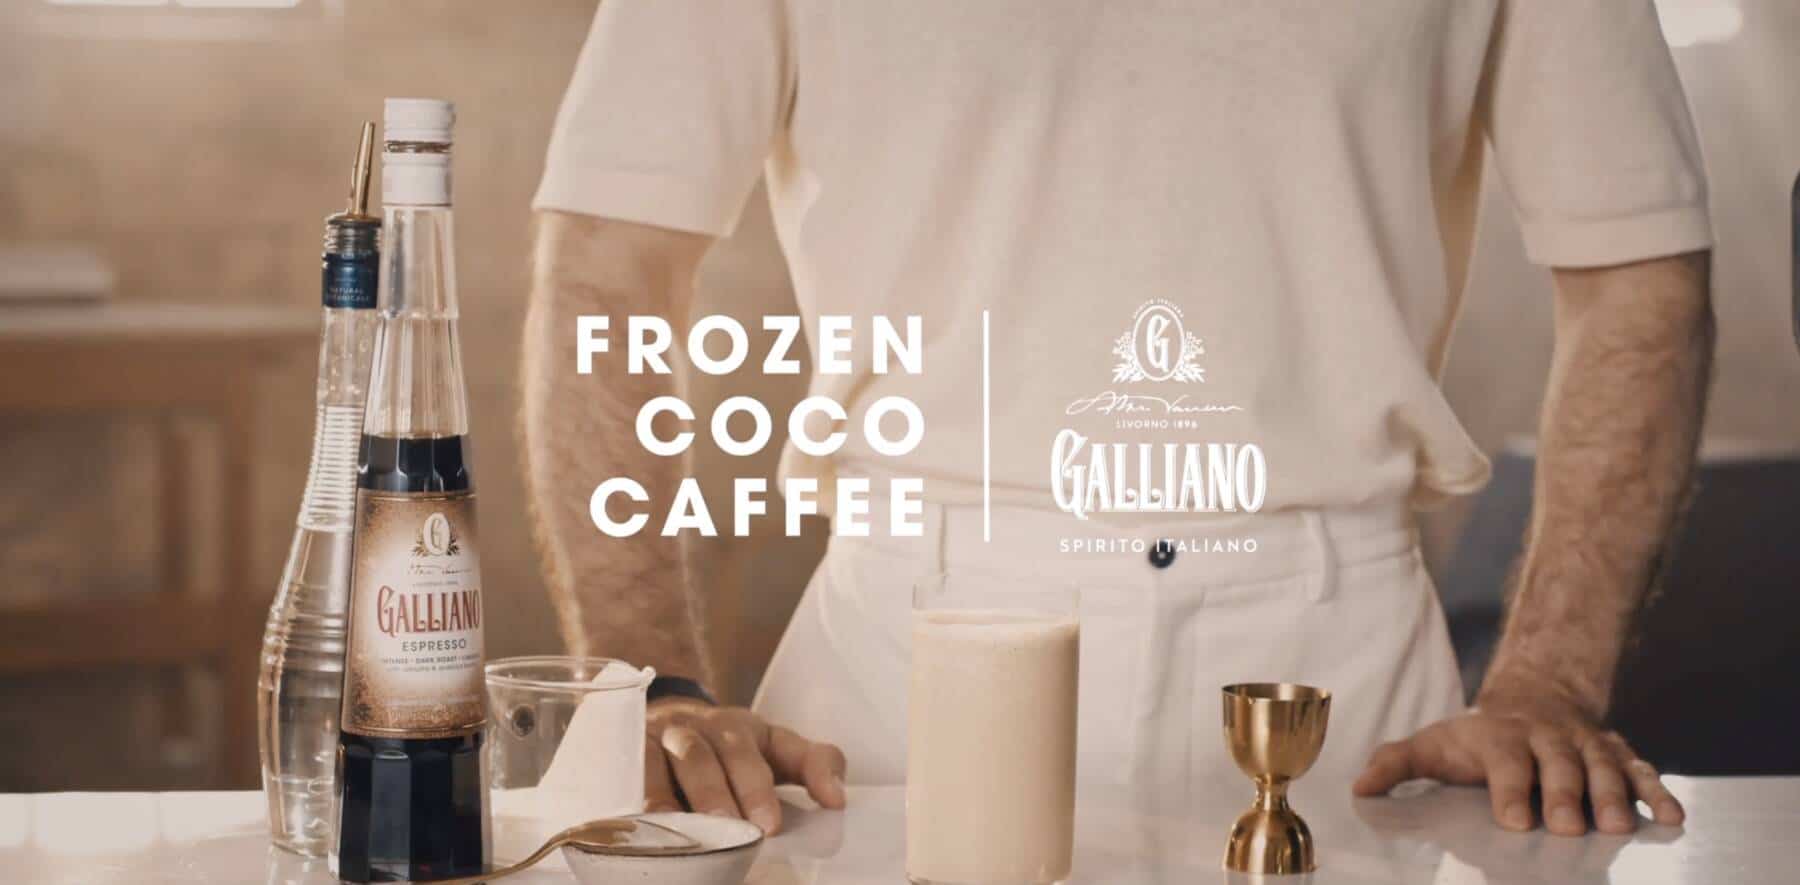 Frozen Coco Caffee cocktail by Galliano